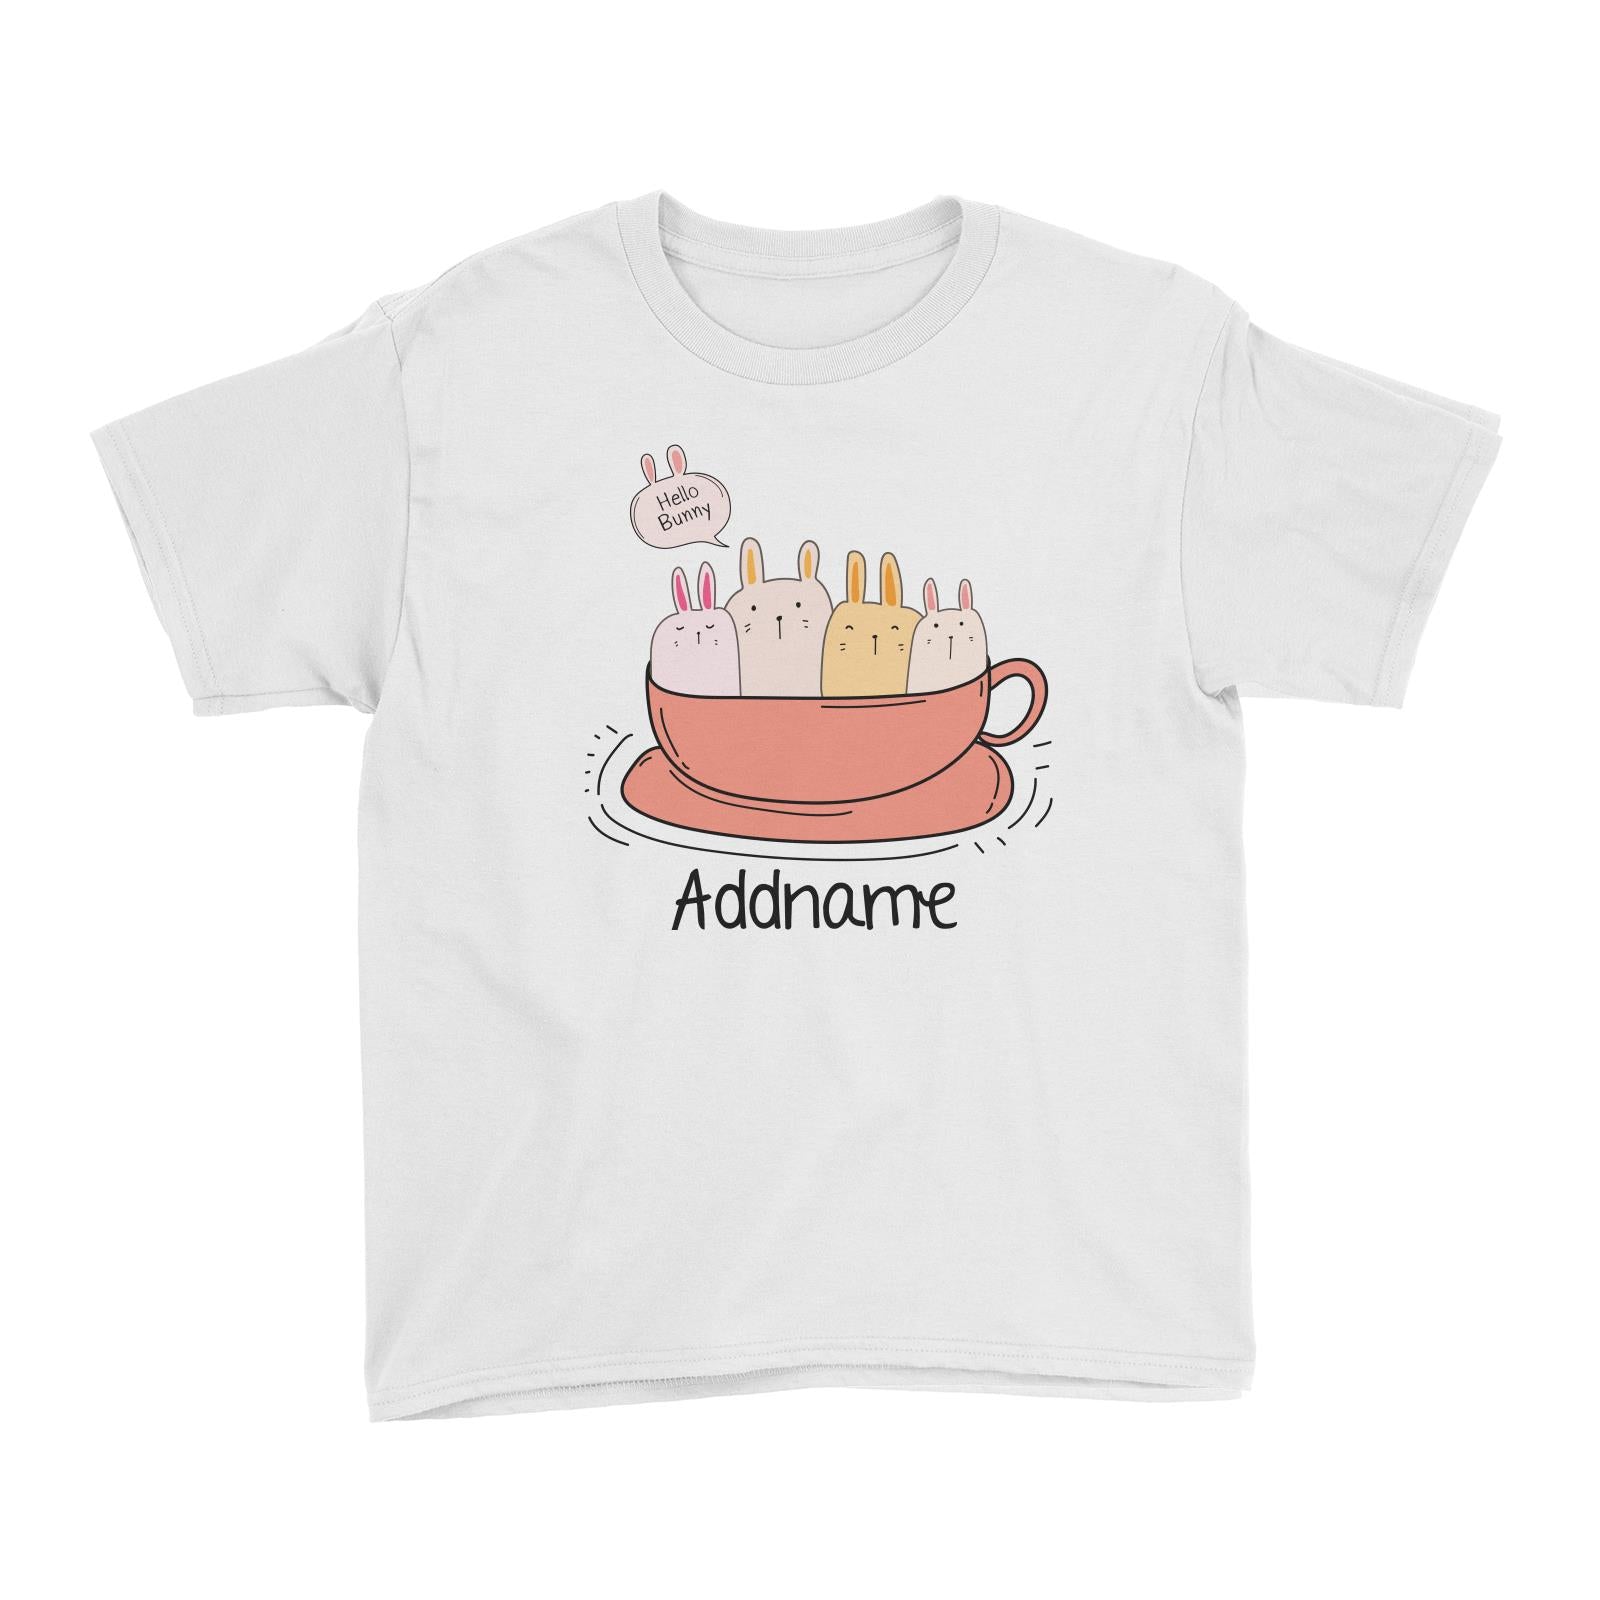 Cute Animals And Friends Series Hello Bunny Coffee Cup Group Addname Kid's T-Shirt